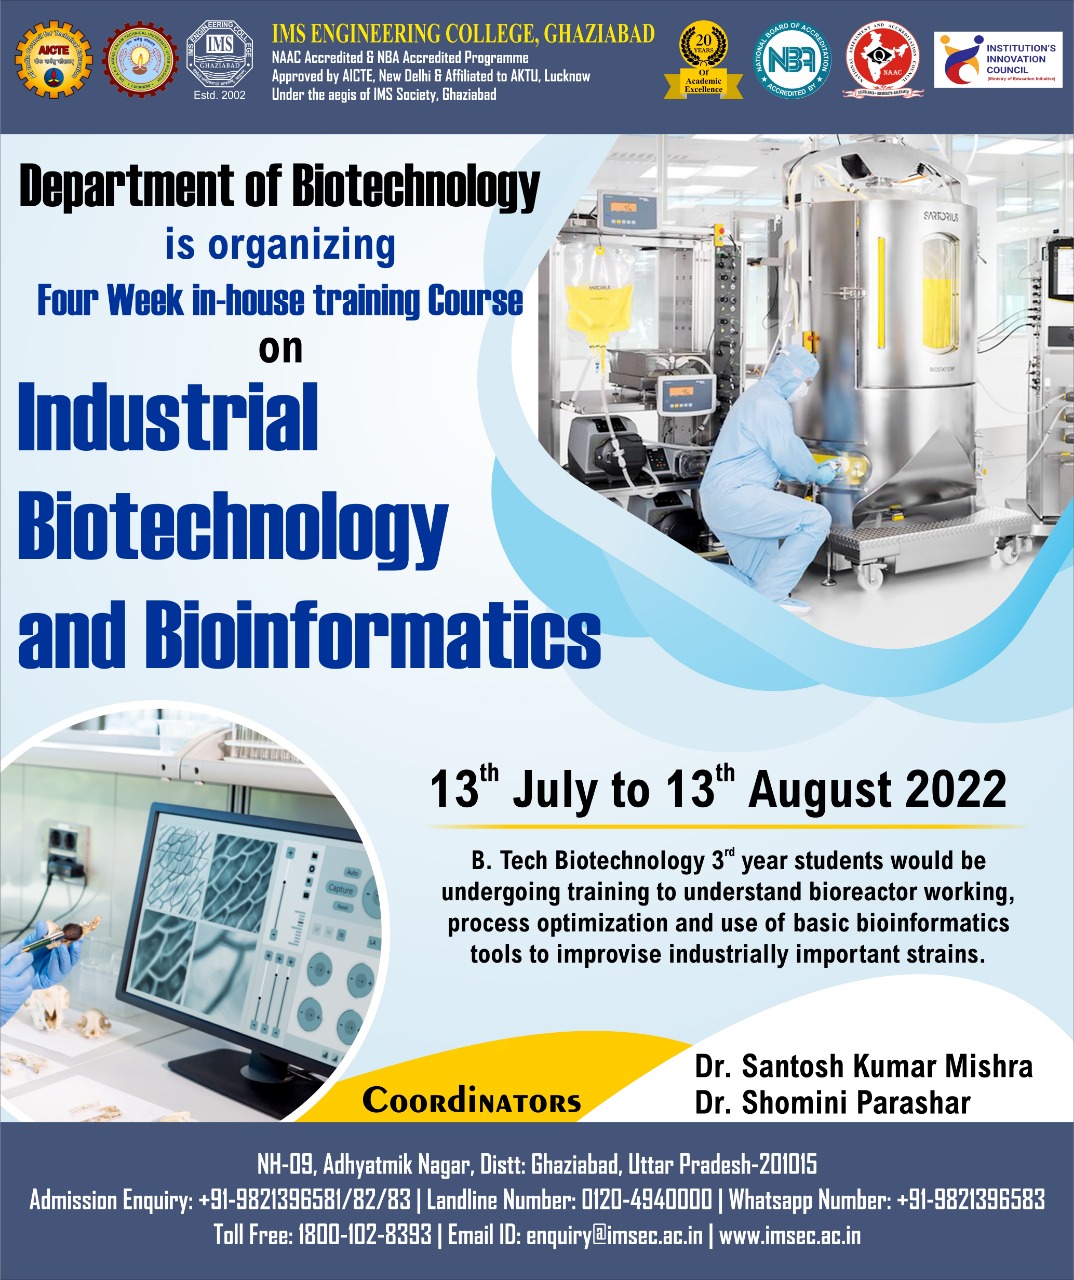 Training/internship in the field of Industrial Biotechnology and Bioinformatics.